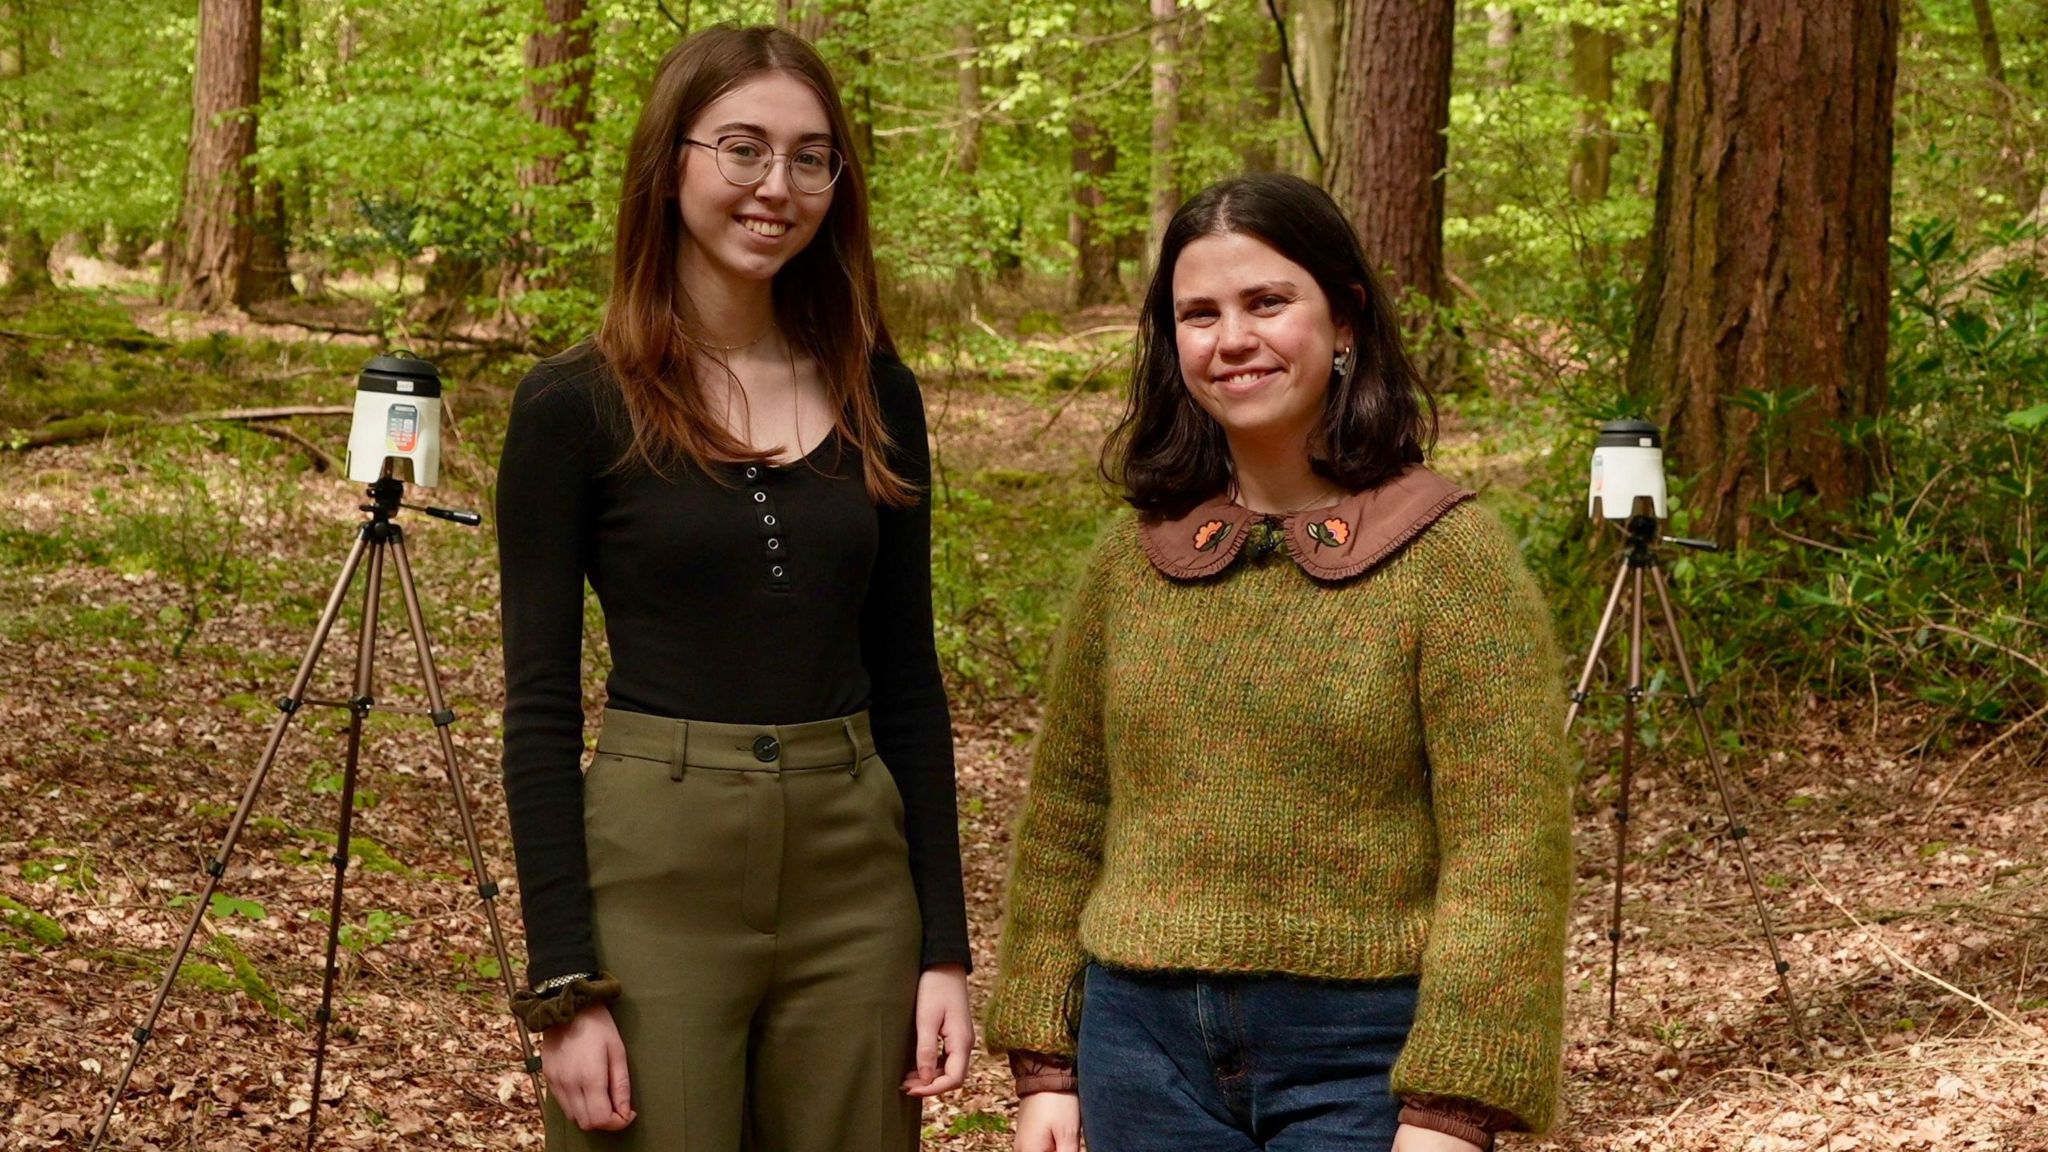 Two women in their twenties stand in front of two air sampling machines surrounded by woodland.